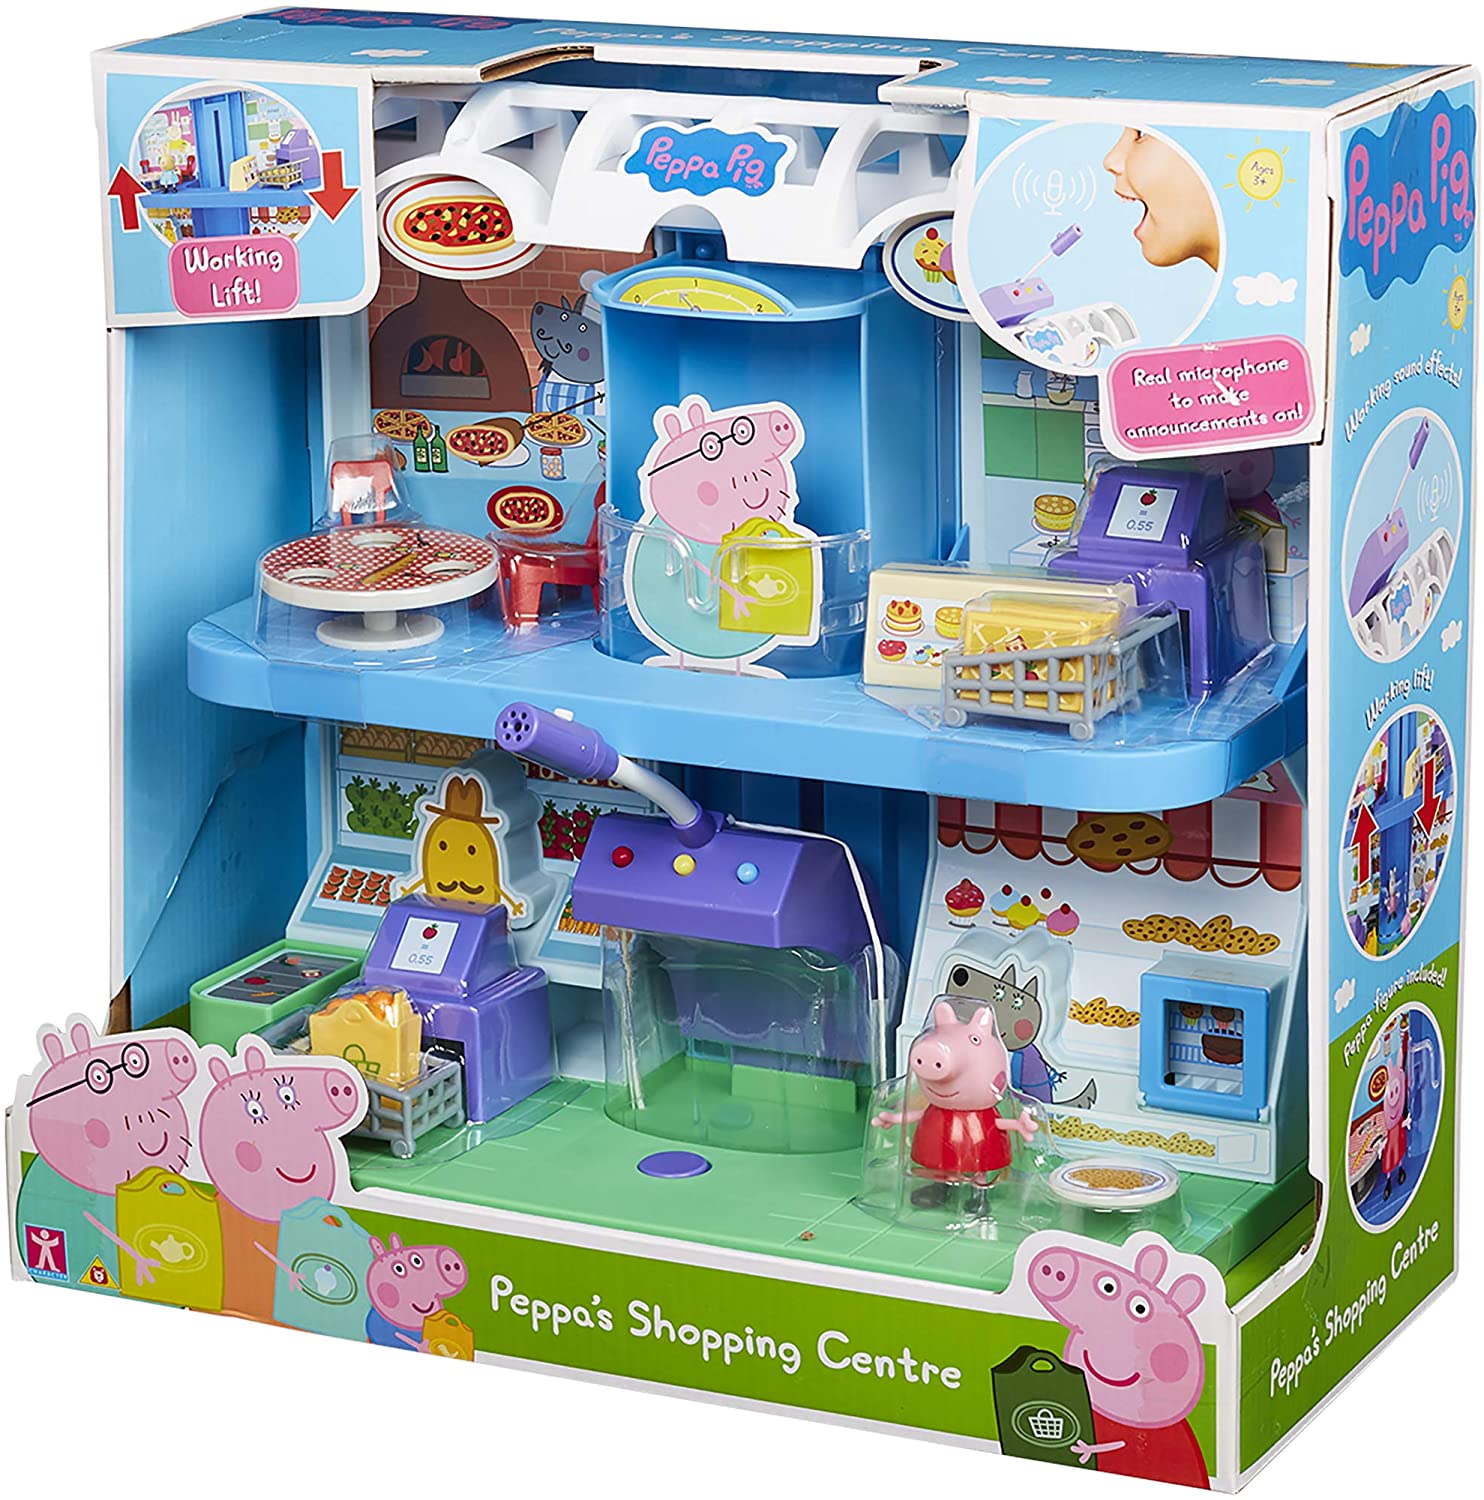 CENTRO COMERCIAL PEPPA PIG F24025 - N42321